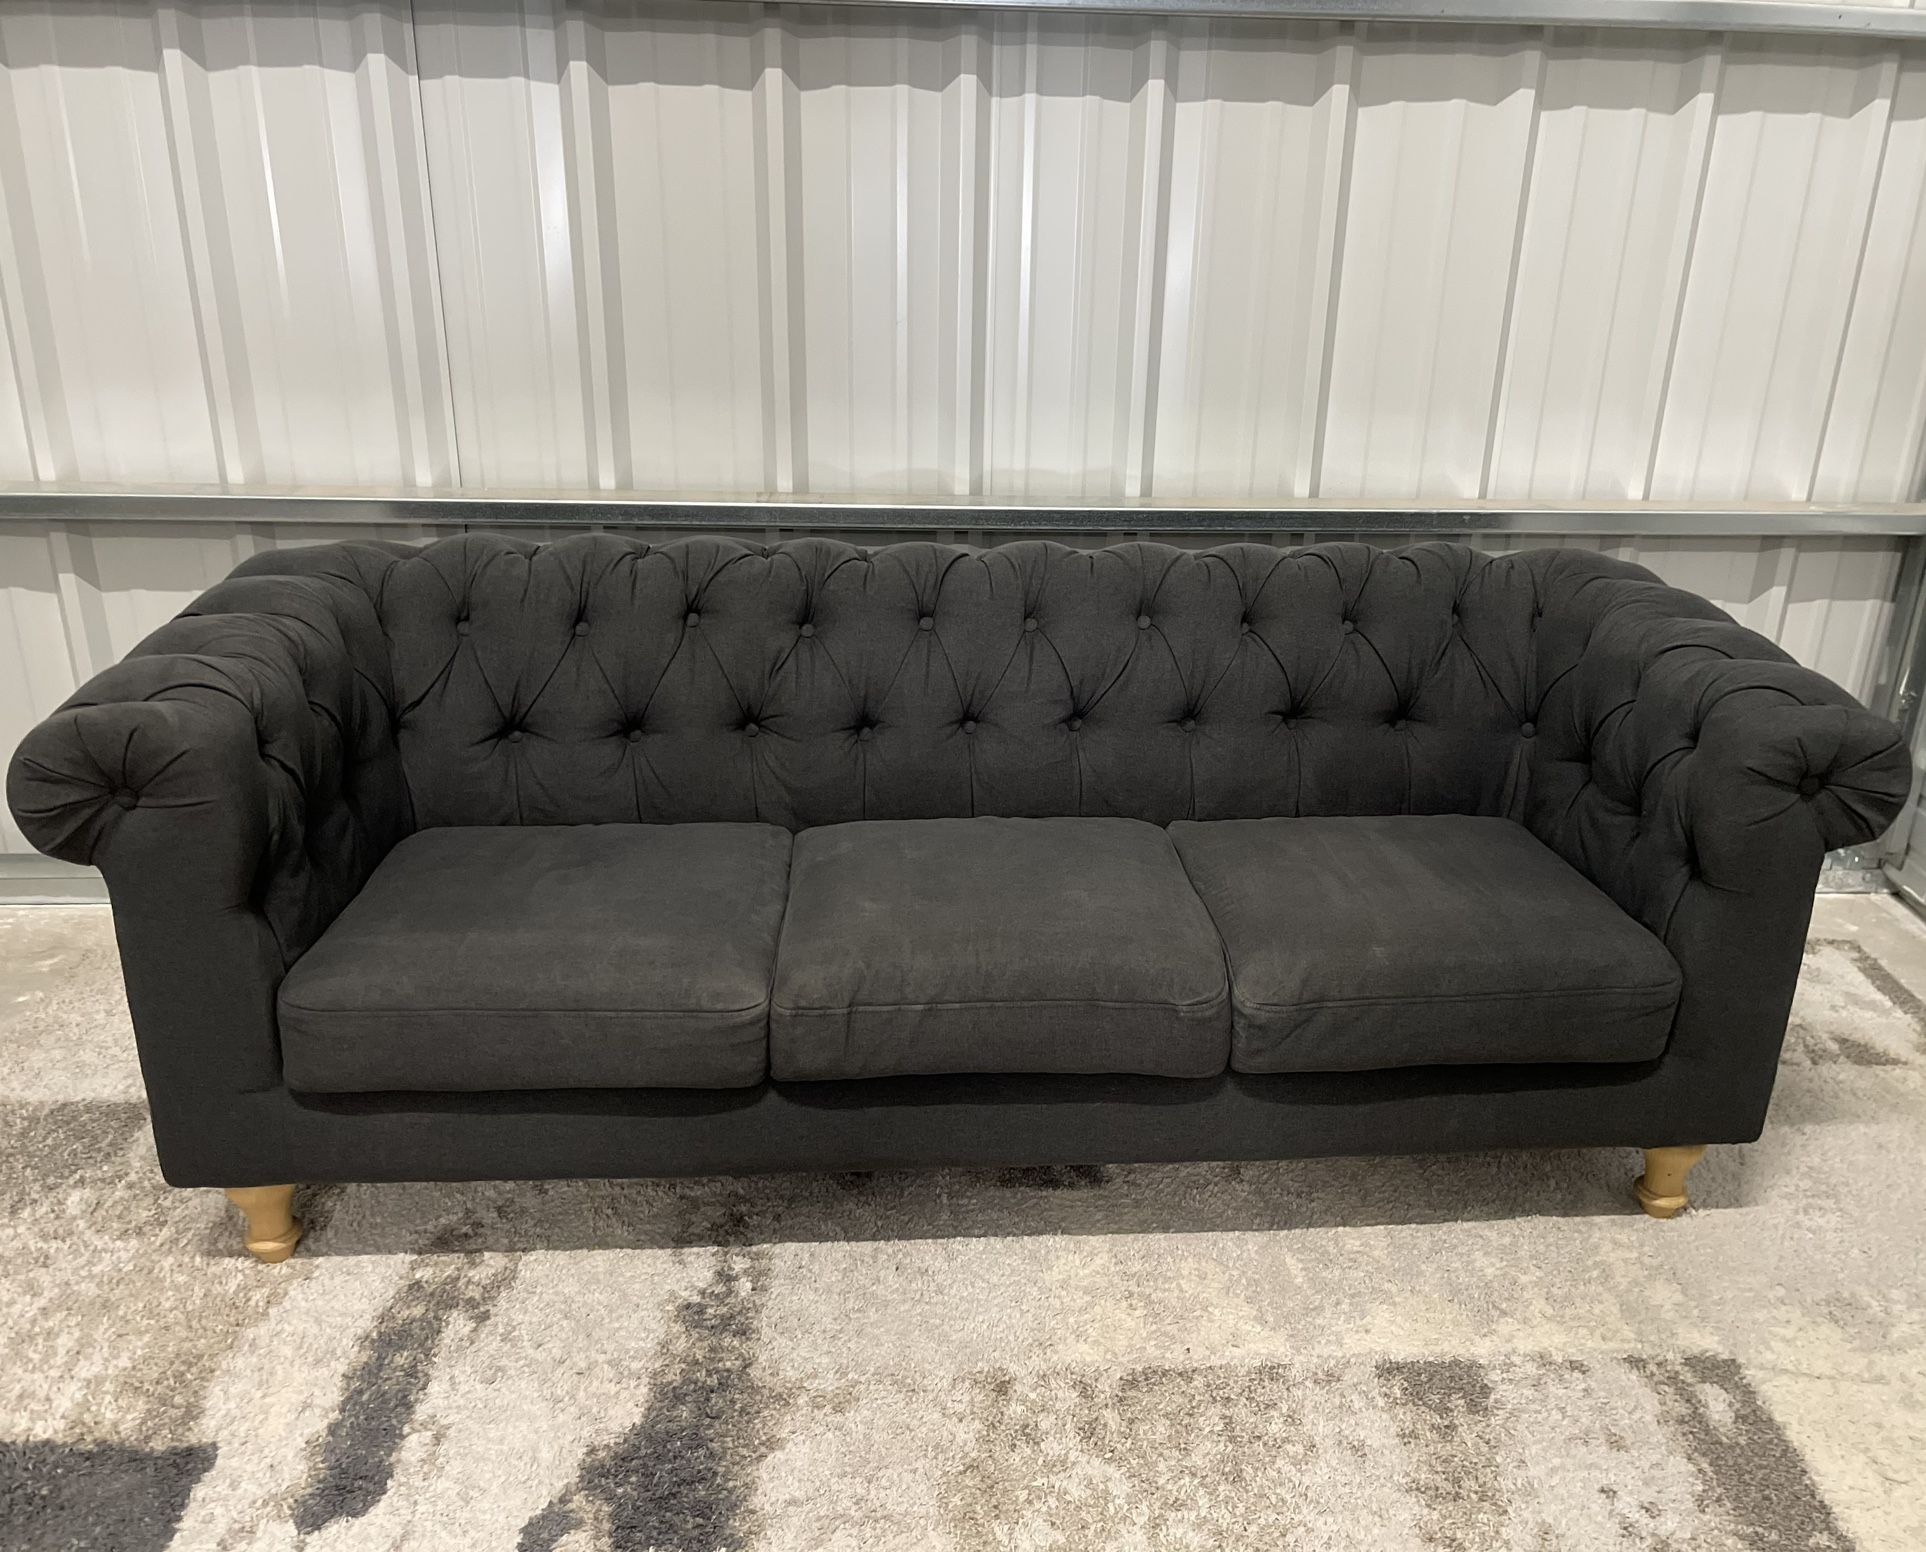 World Market Quentin Chesterfield 3 Seater Sofa